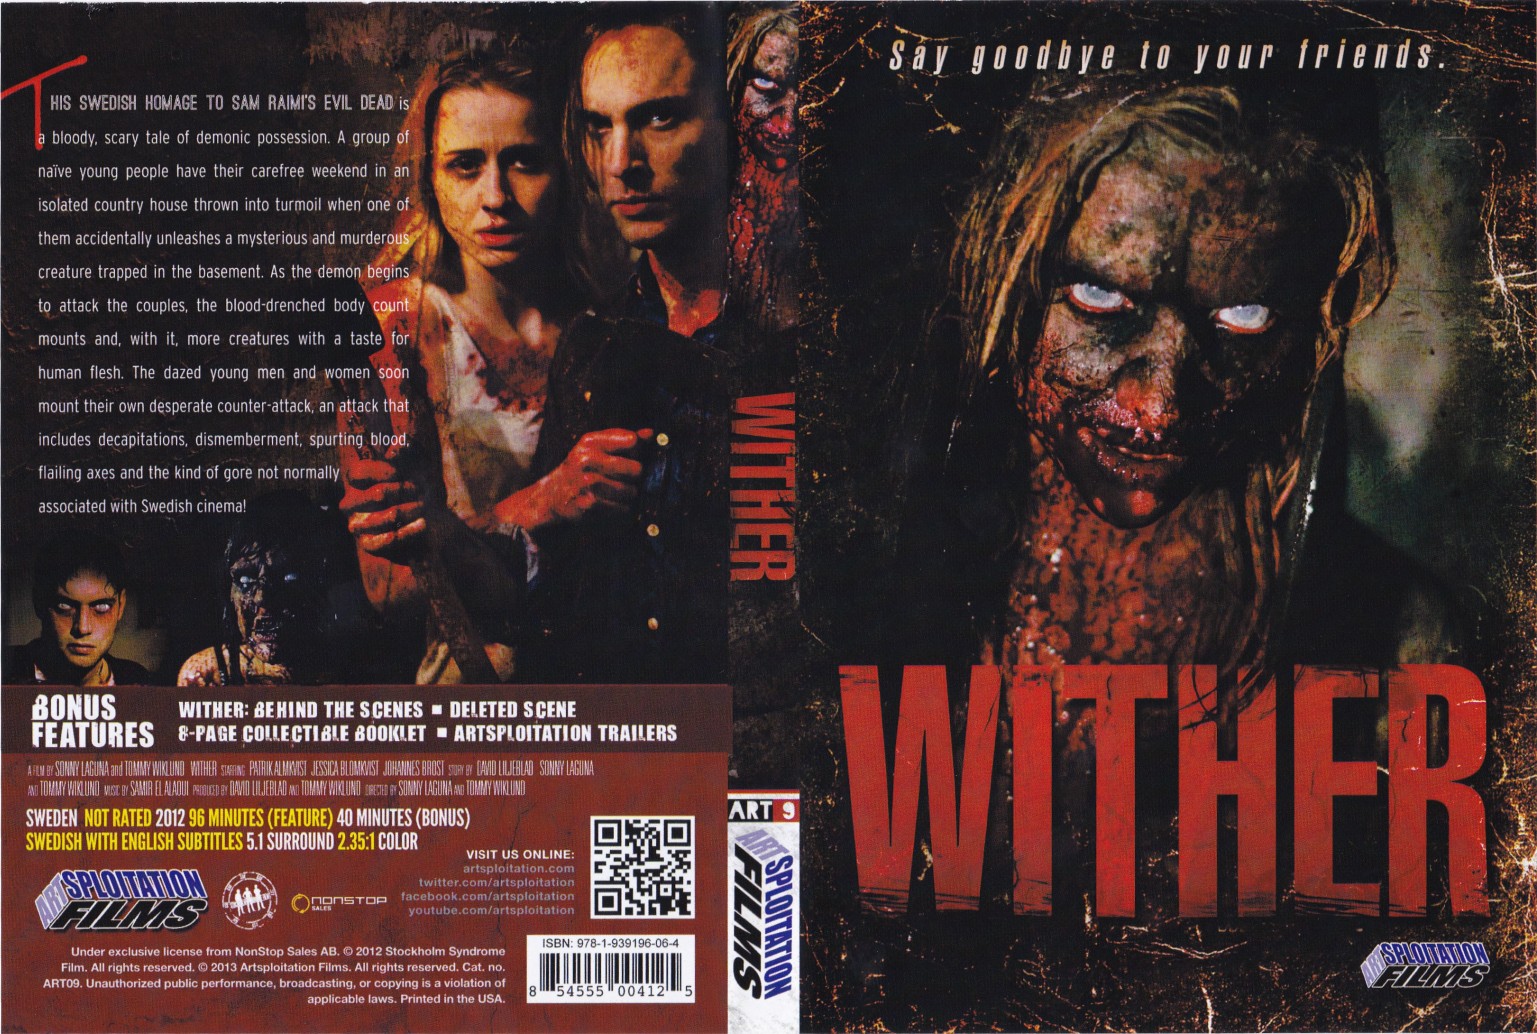 Jaquette DVD Wither Zone 1